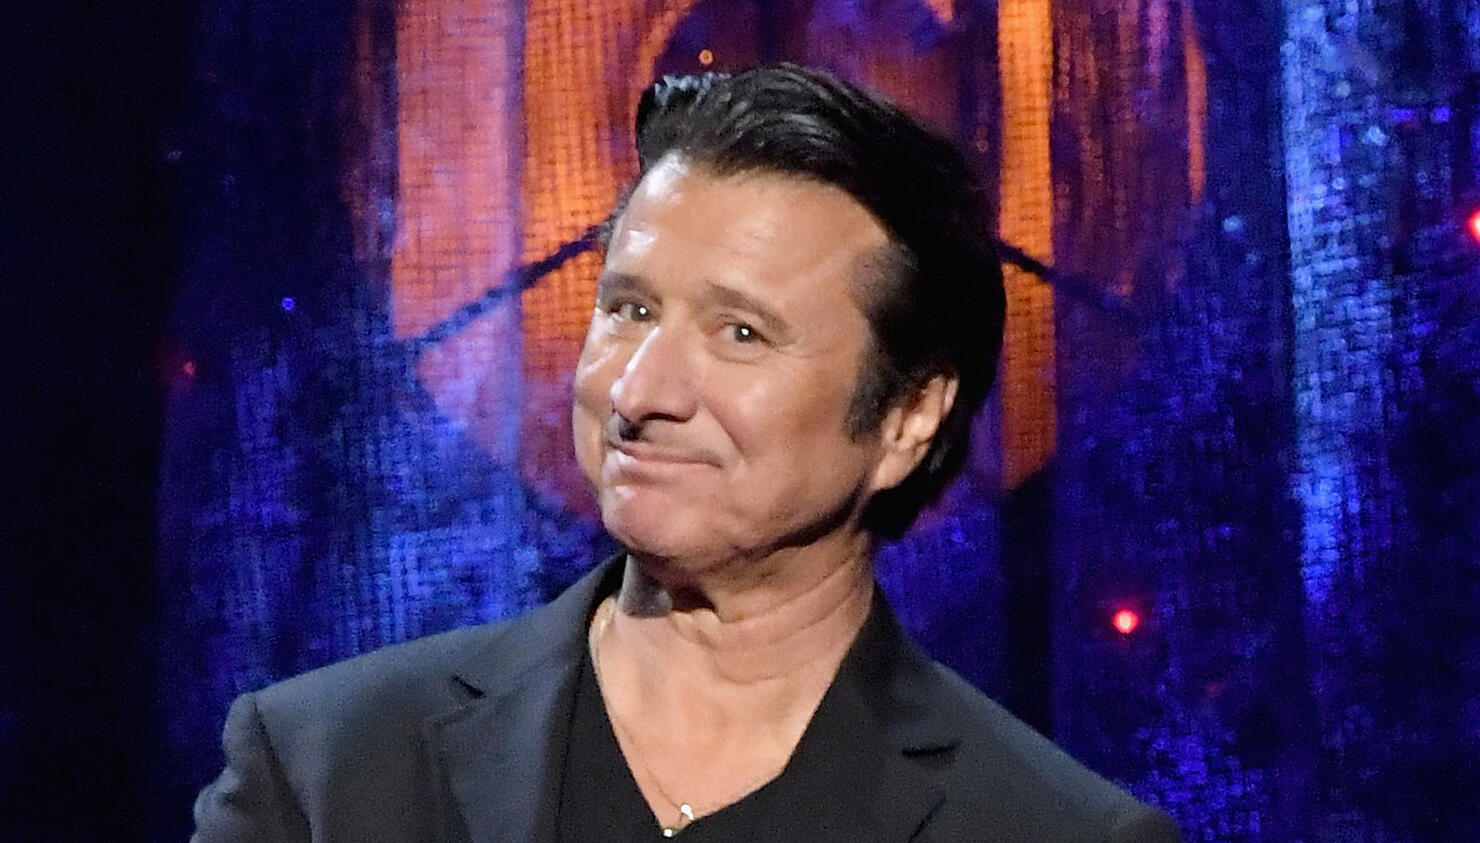 Steve Perry Recorded Vocals With Toad the Wet Sprocket